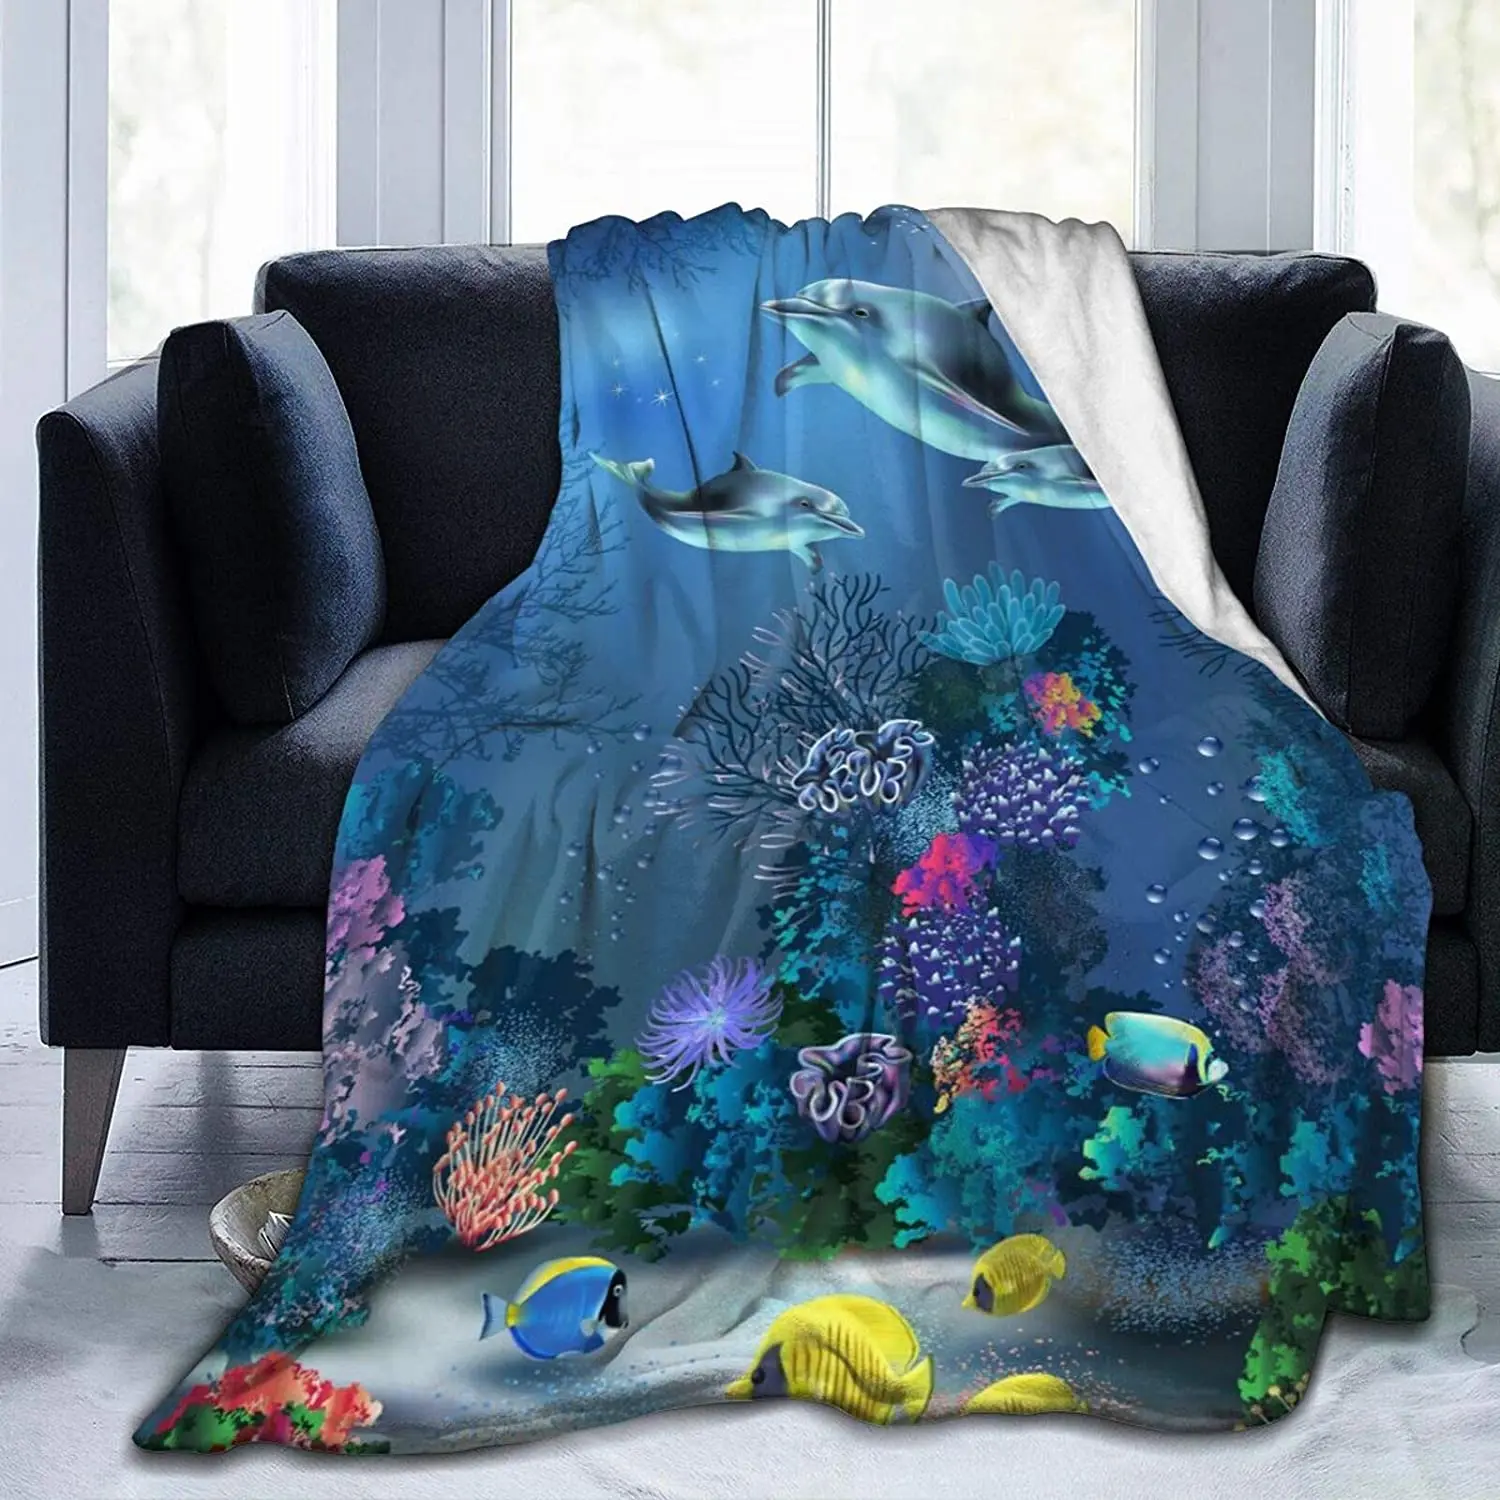 

Sea Tropical Fish and Dolphins Soft Throw Blanket All Season Microplush Warm Blankets Lightweight Tufted Fuzzy Flannel Fleece